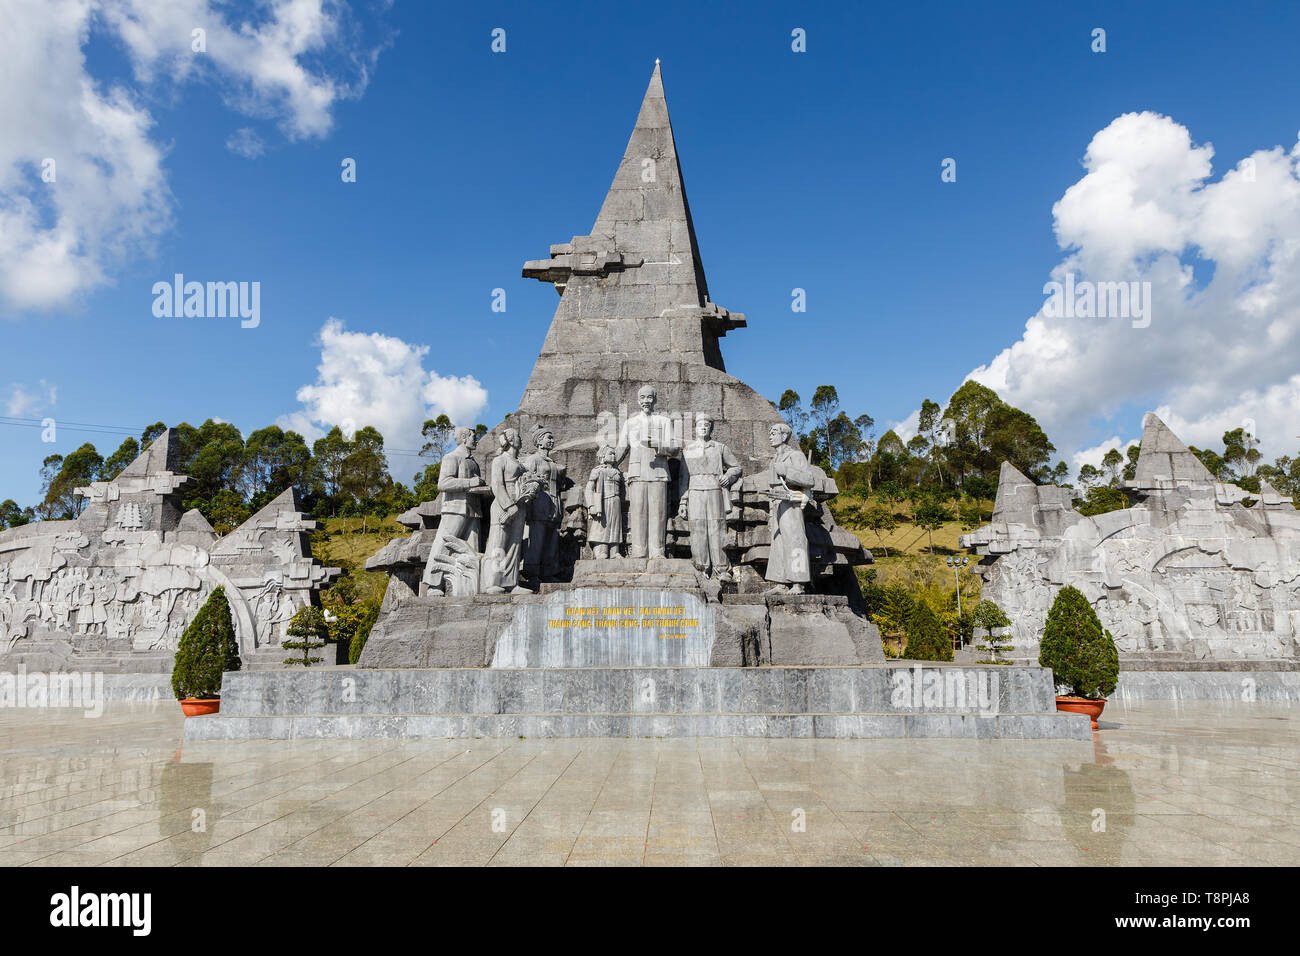 Lai Chau, Vietnam - November 21, 2018: Uncle Ho monument with people and ethnicity of Lai Chau province, Vietnam. Stock Photo